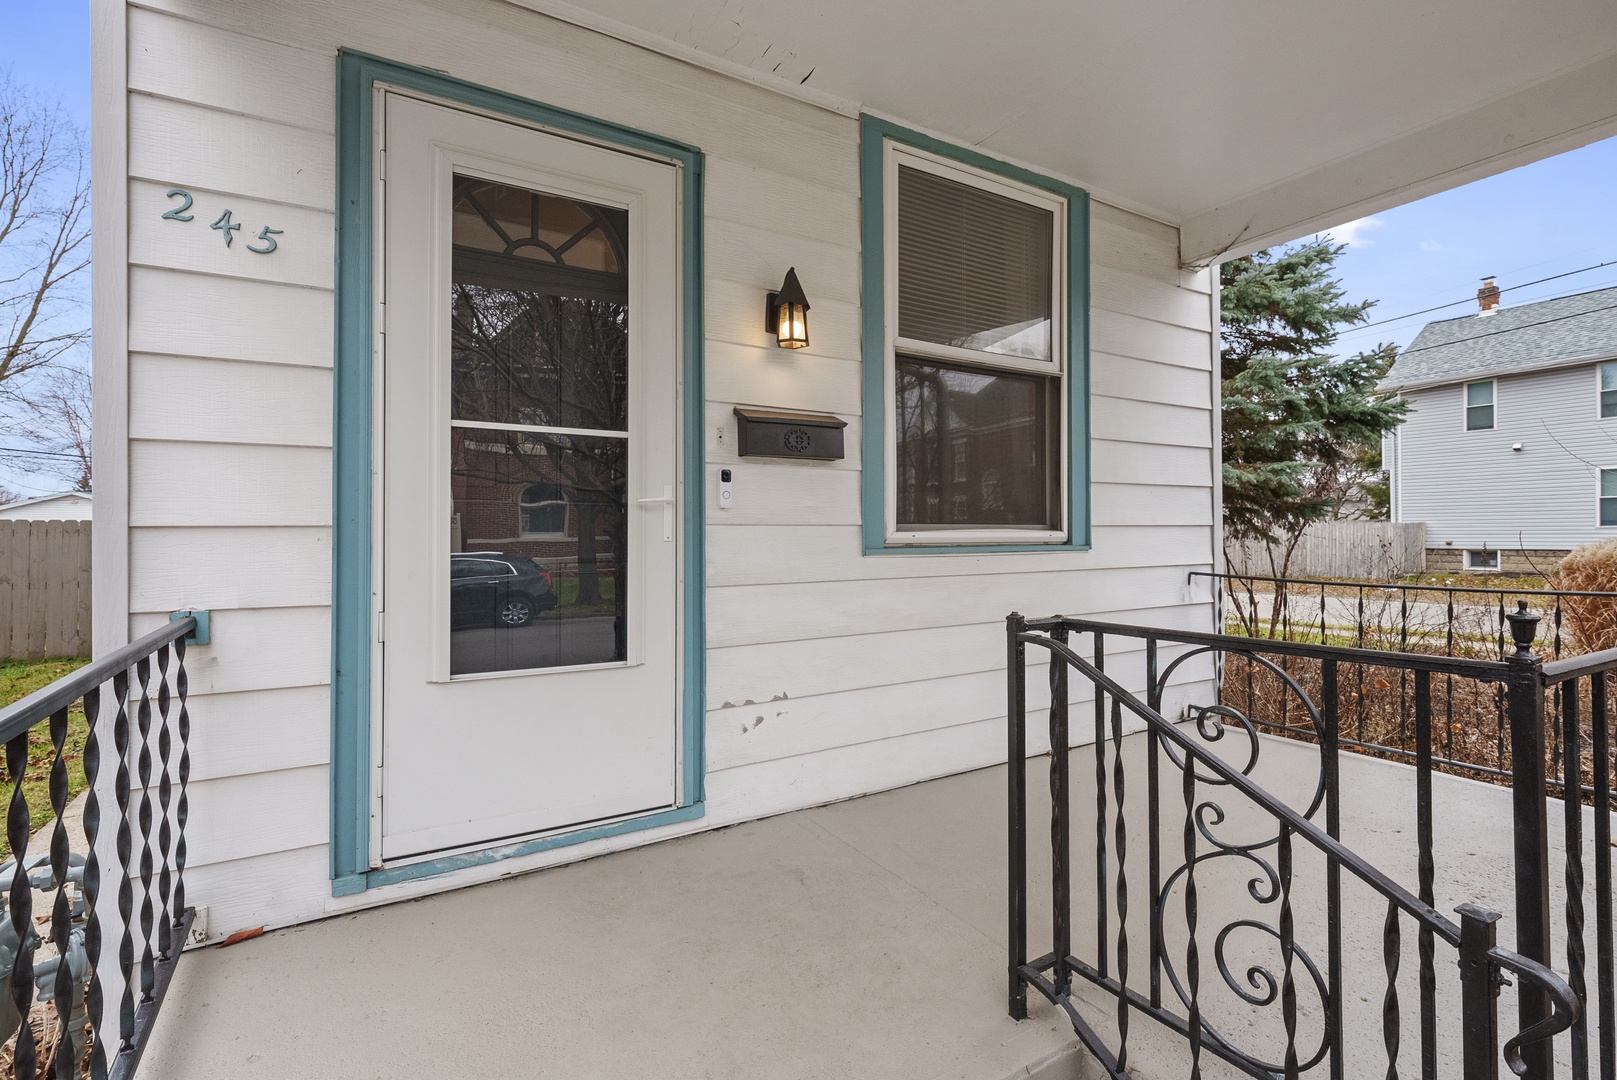 This charming home is equipped with keyless entry for guest convenience